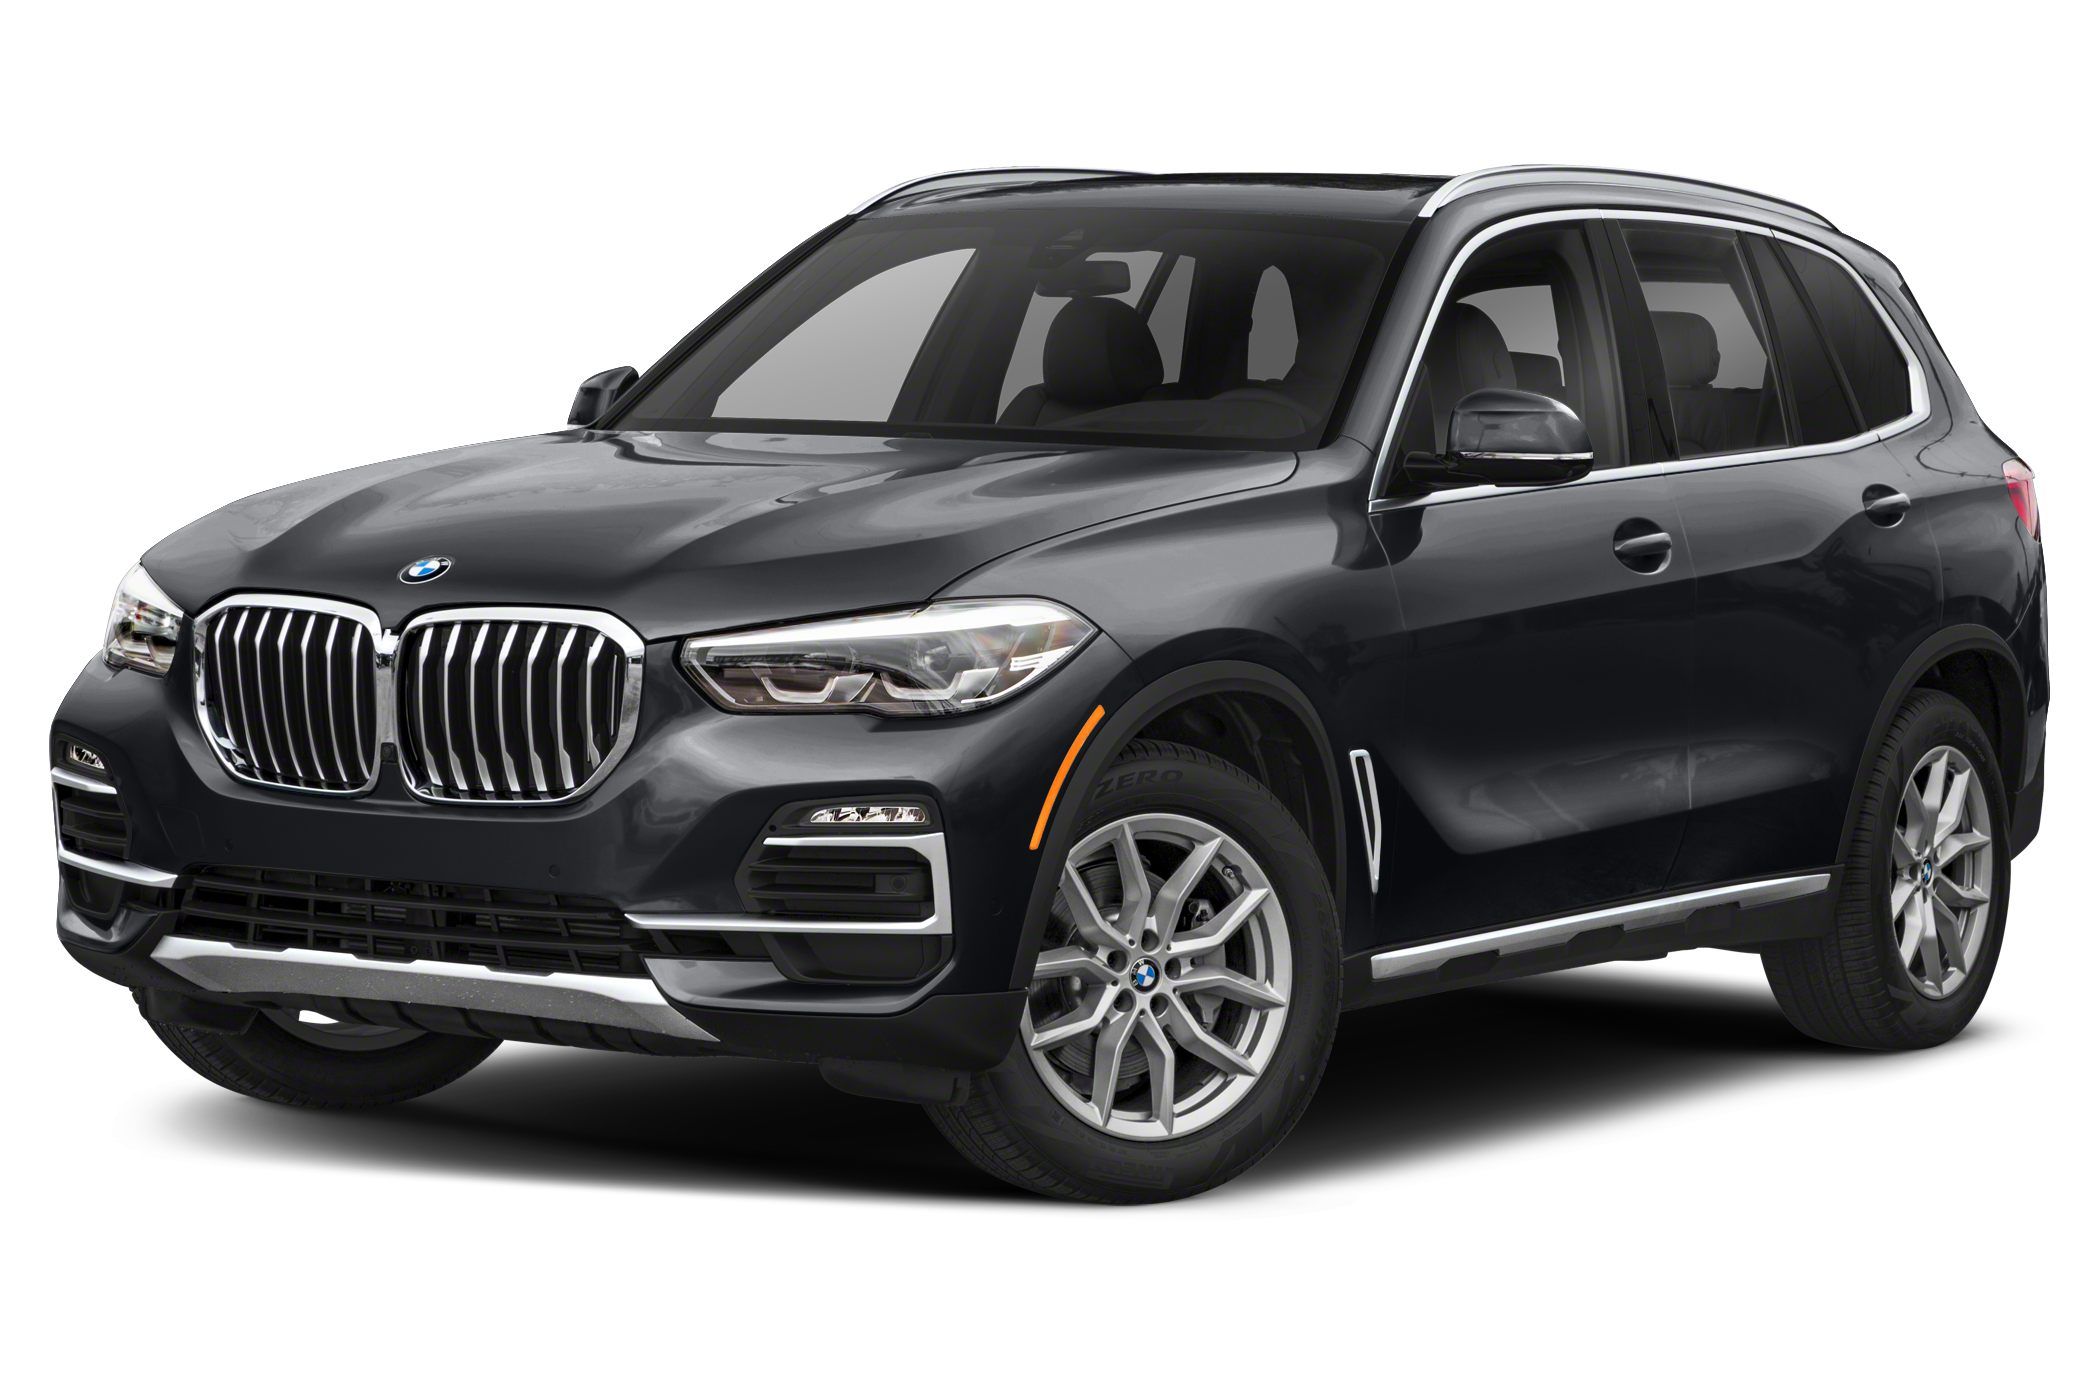 BMW X5 Picture